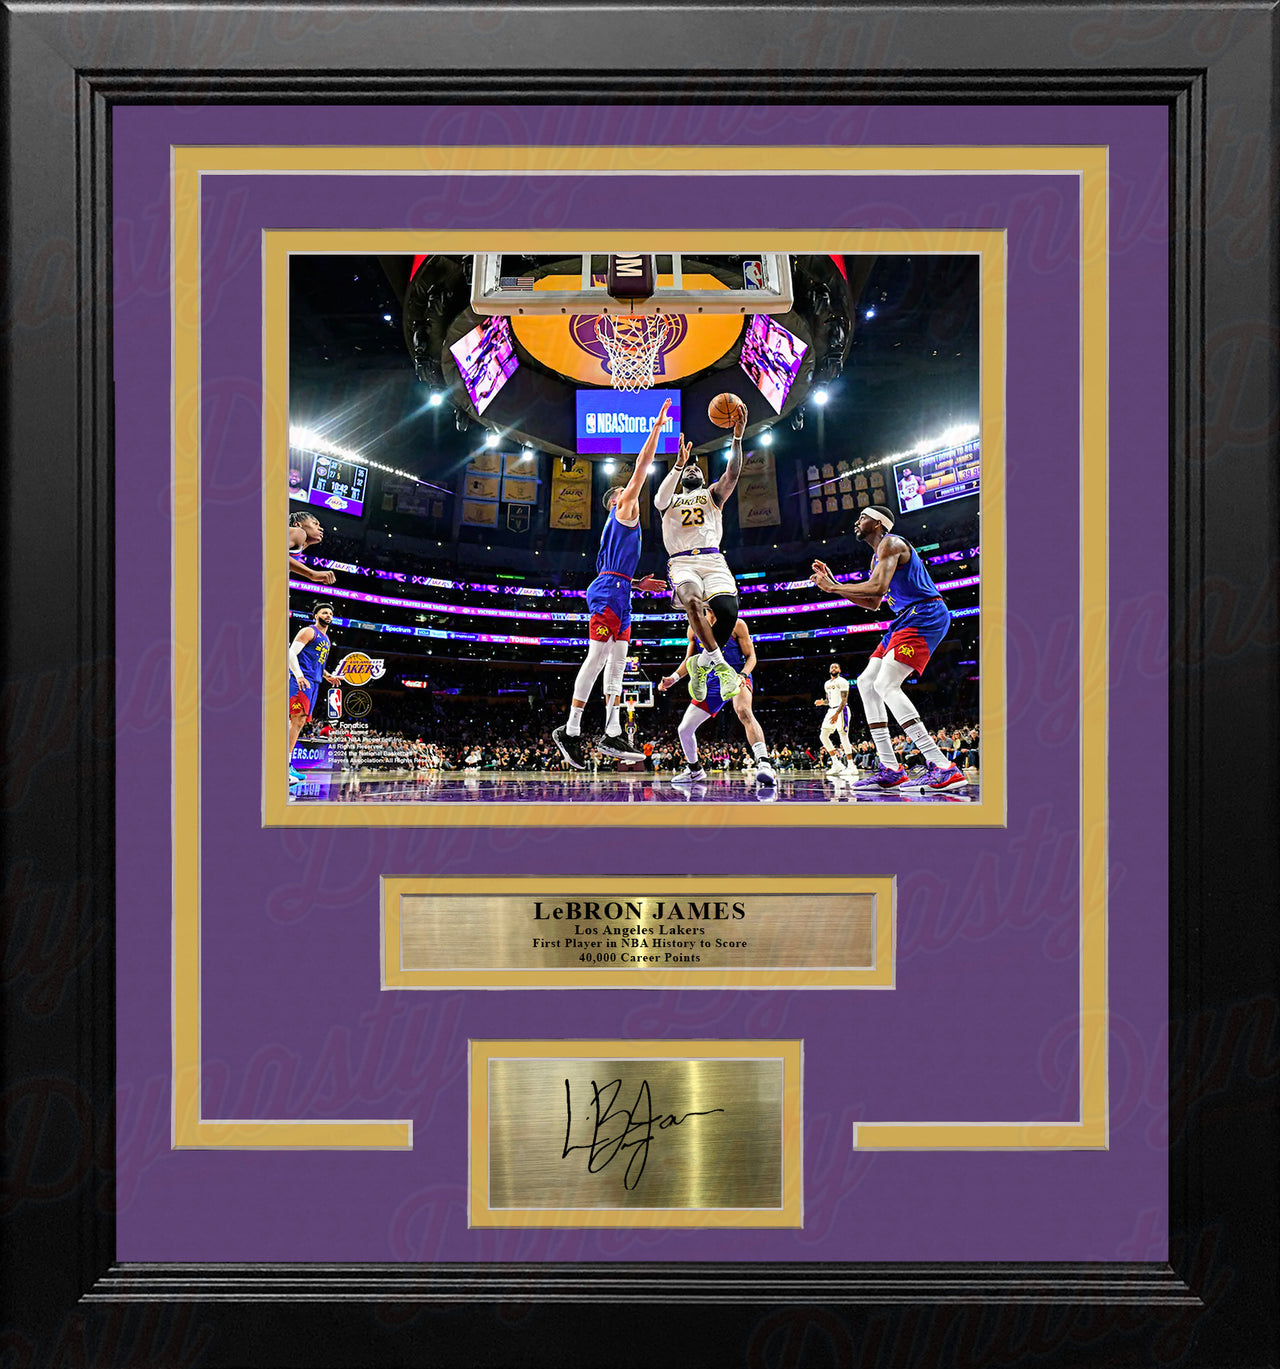 LeBron James 1st Player to Score 40,000 Points LA Lakers 8x10 Framed Photo with Engraved Autograph